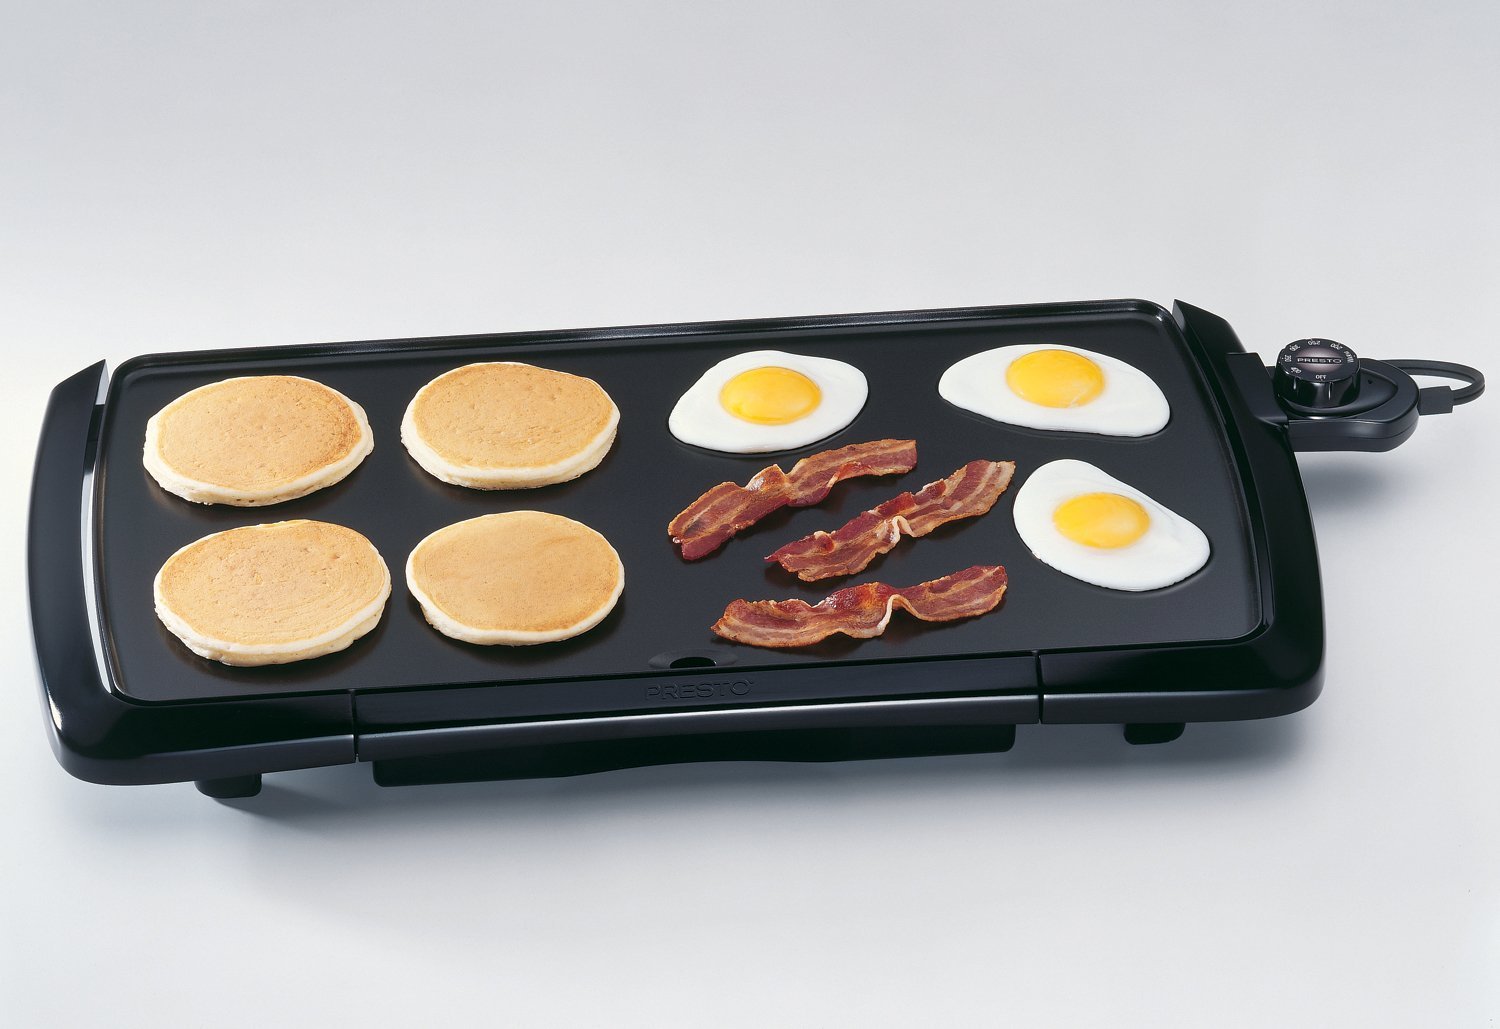 Presto 20"Cool-Touch Electric Griddle 07030 Black - image 2 of 2